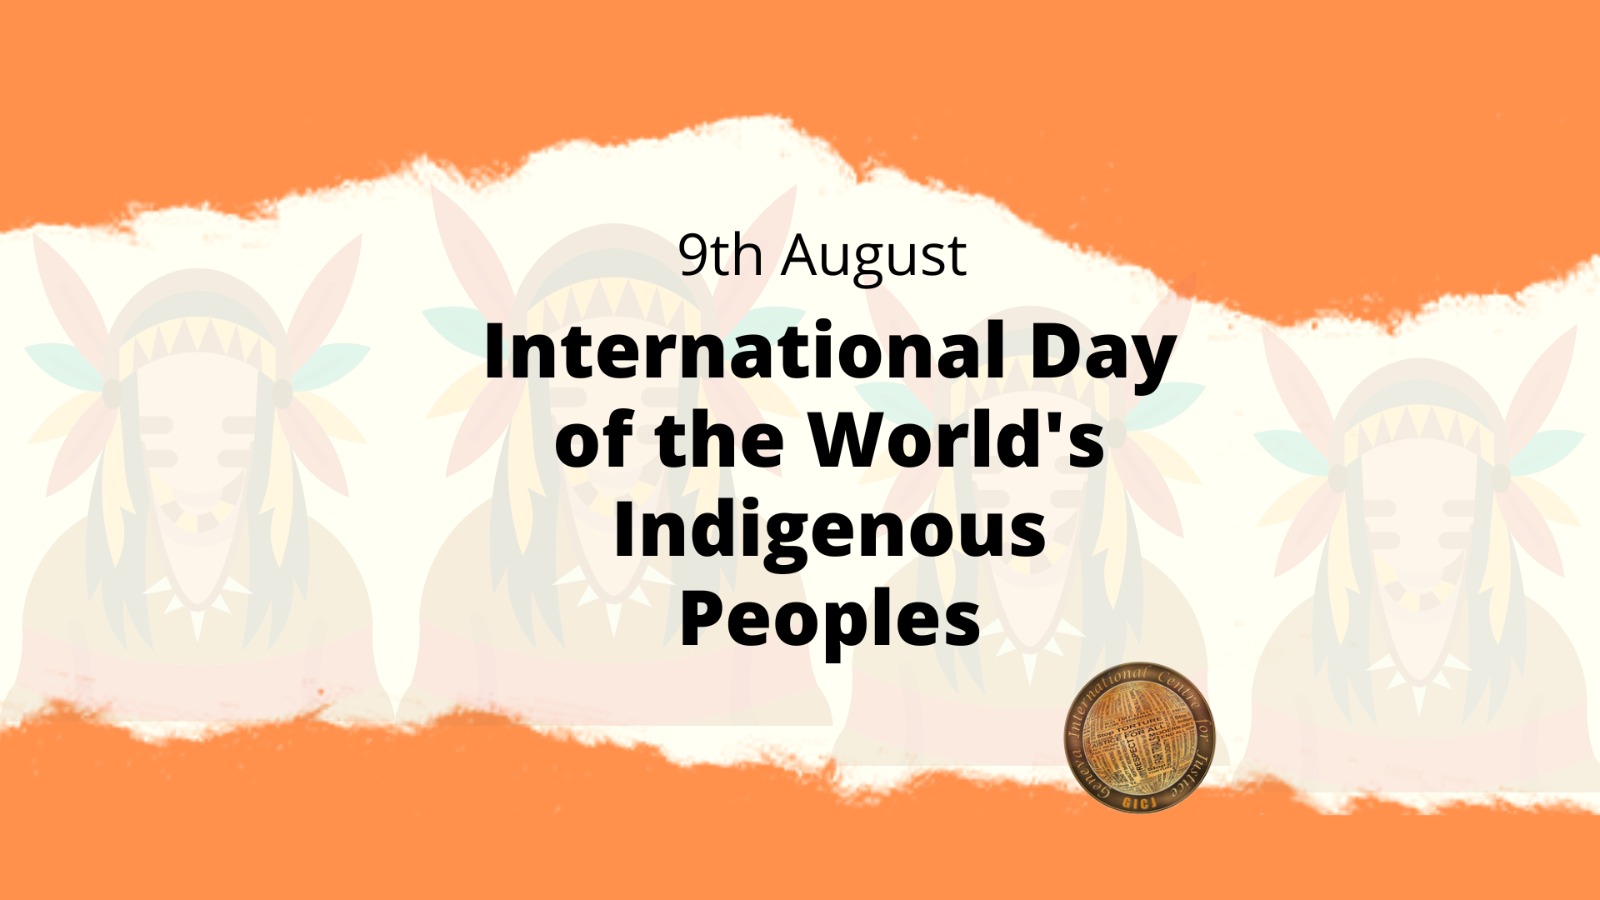 International Day of the World’s Indigenous Peoples - 9th August